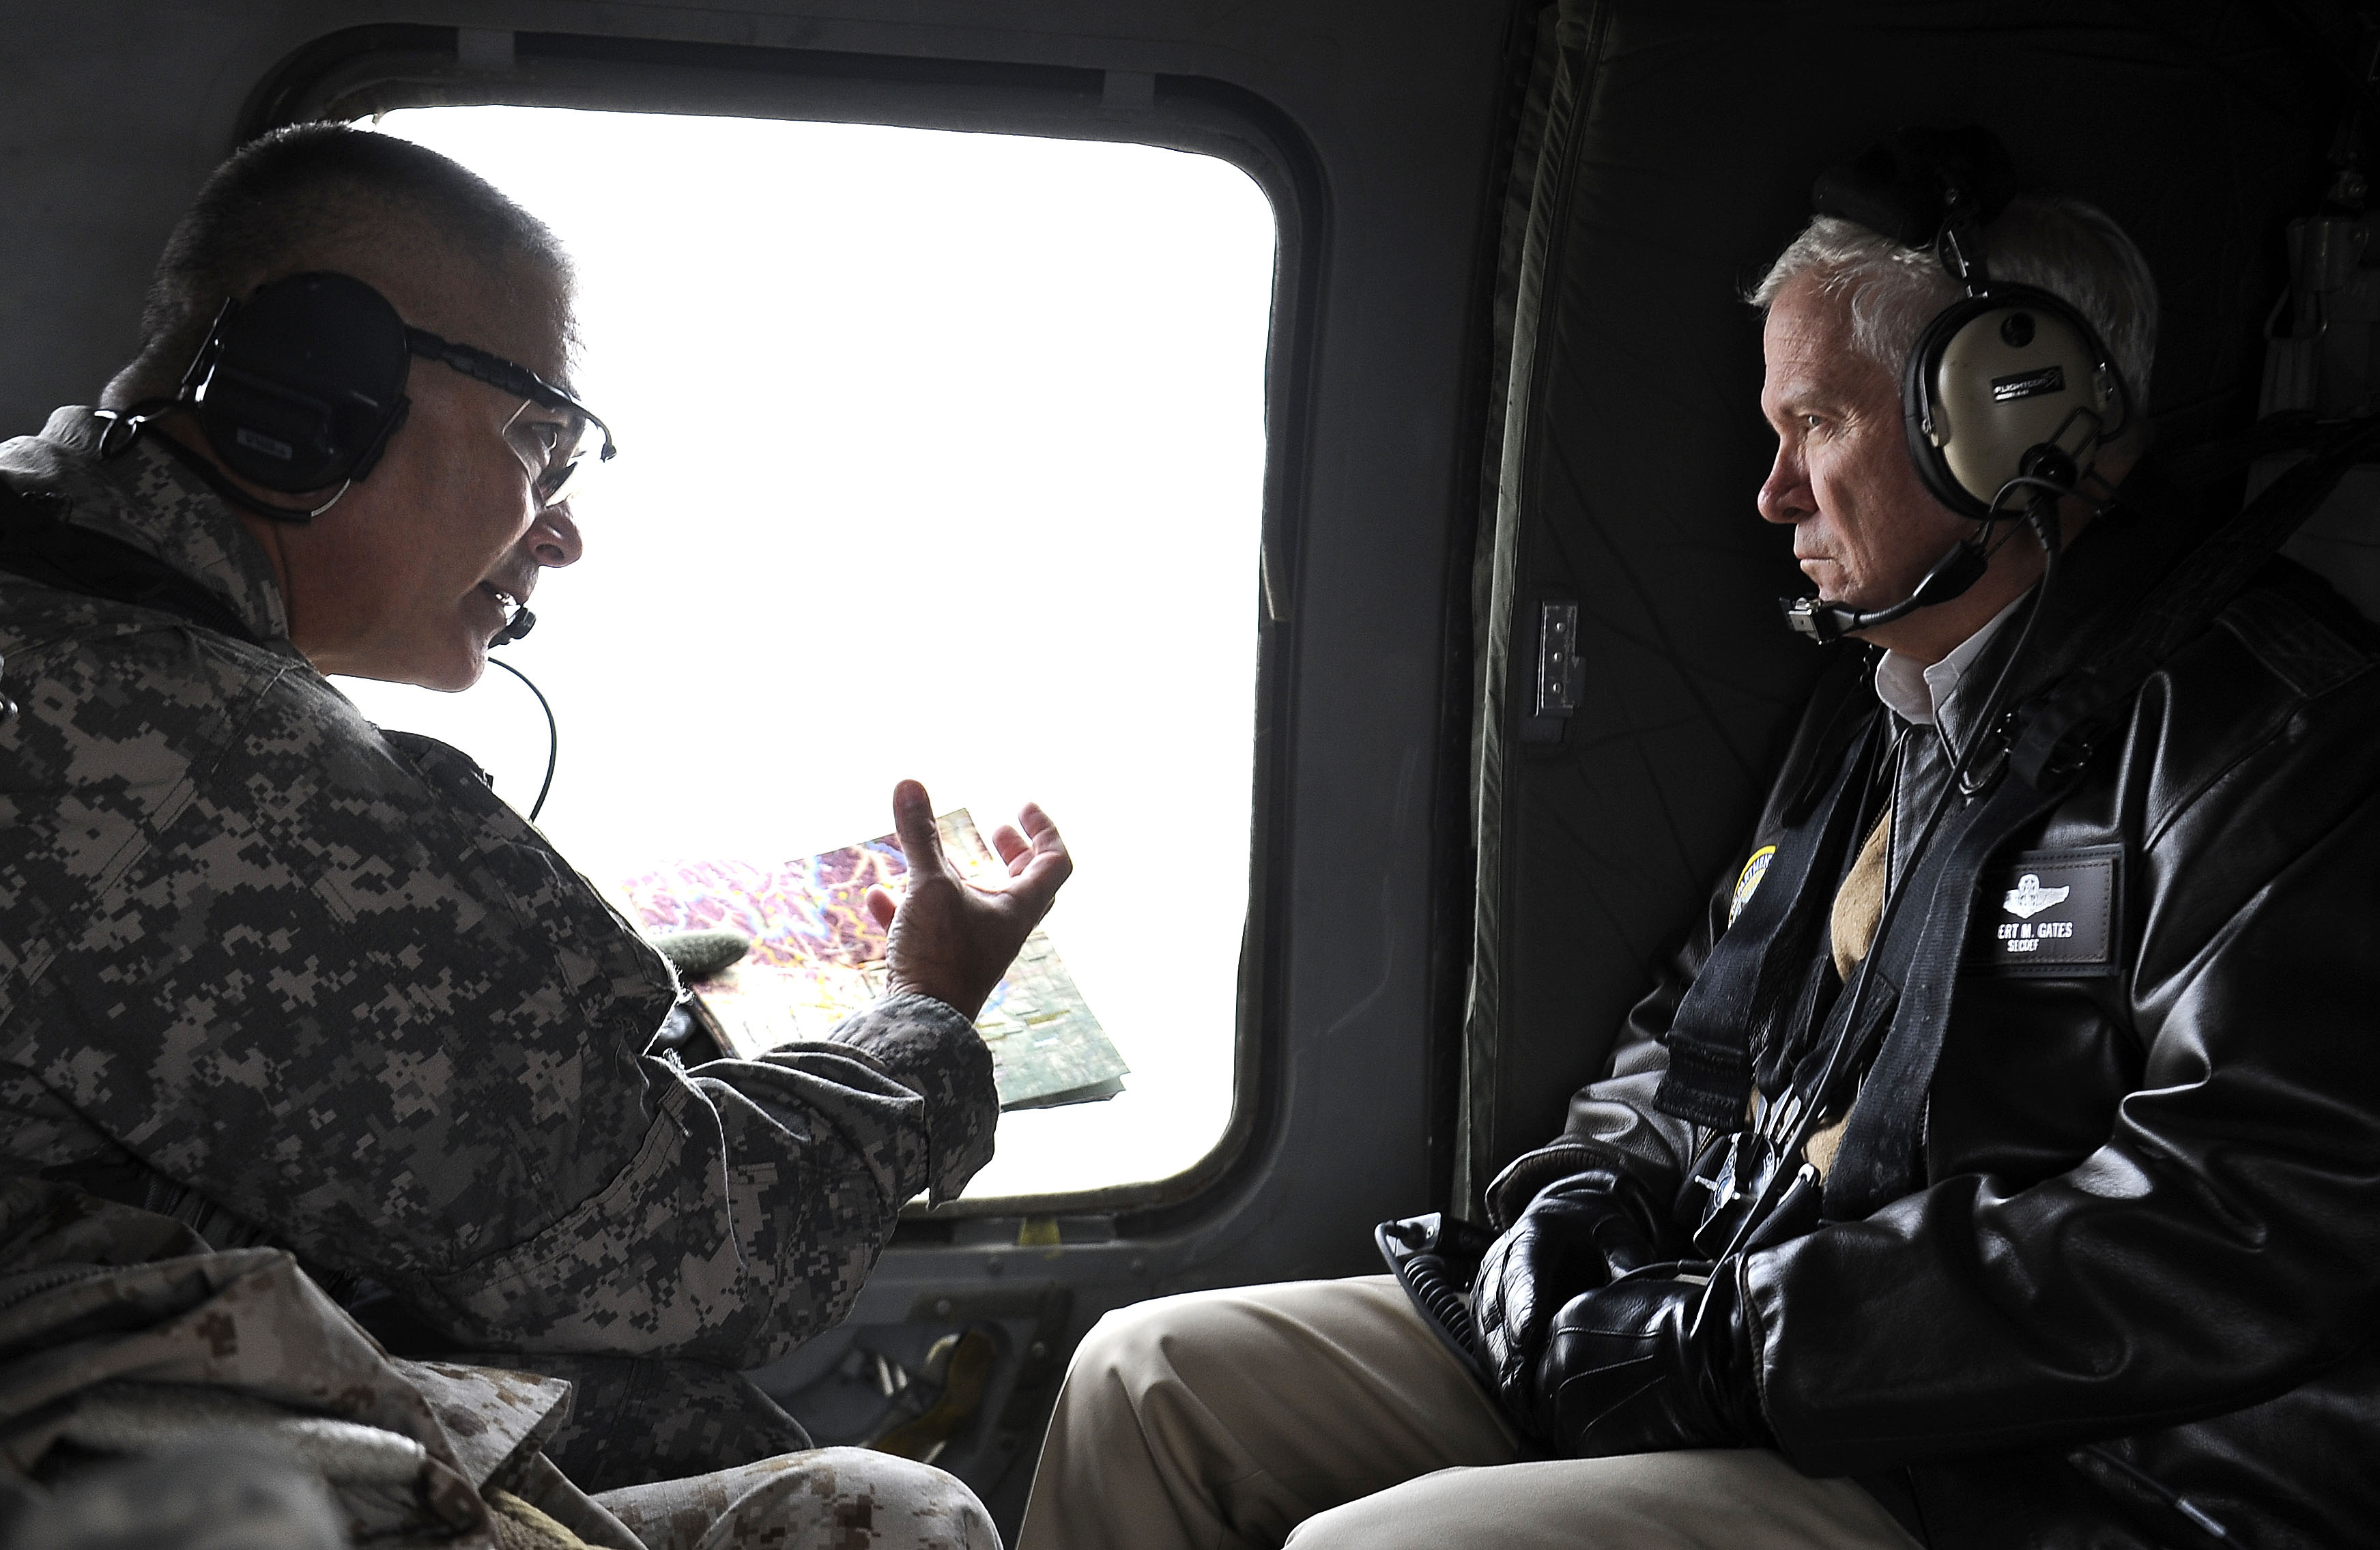 Defense.gov News Photo 101207-F-6655M-003 - Secretary of Defense Robert M. Gates listens to the Commanding General of the 101st Airborne Maj. Gen. Campbell while in flight to Forward